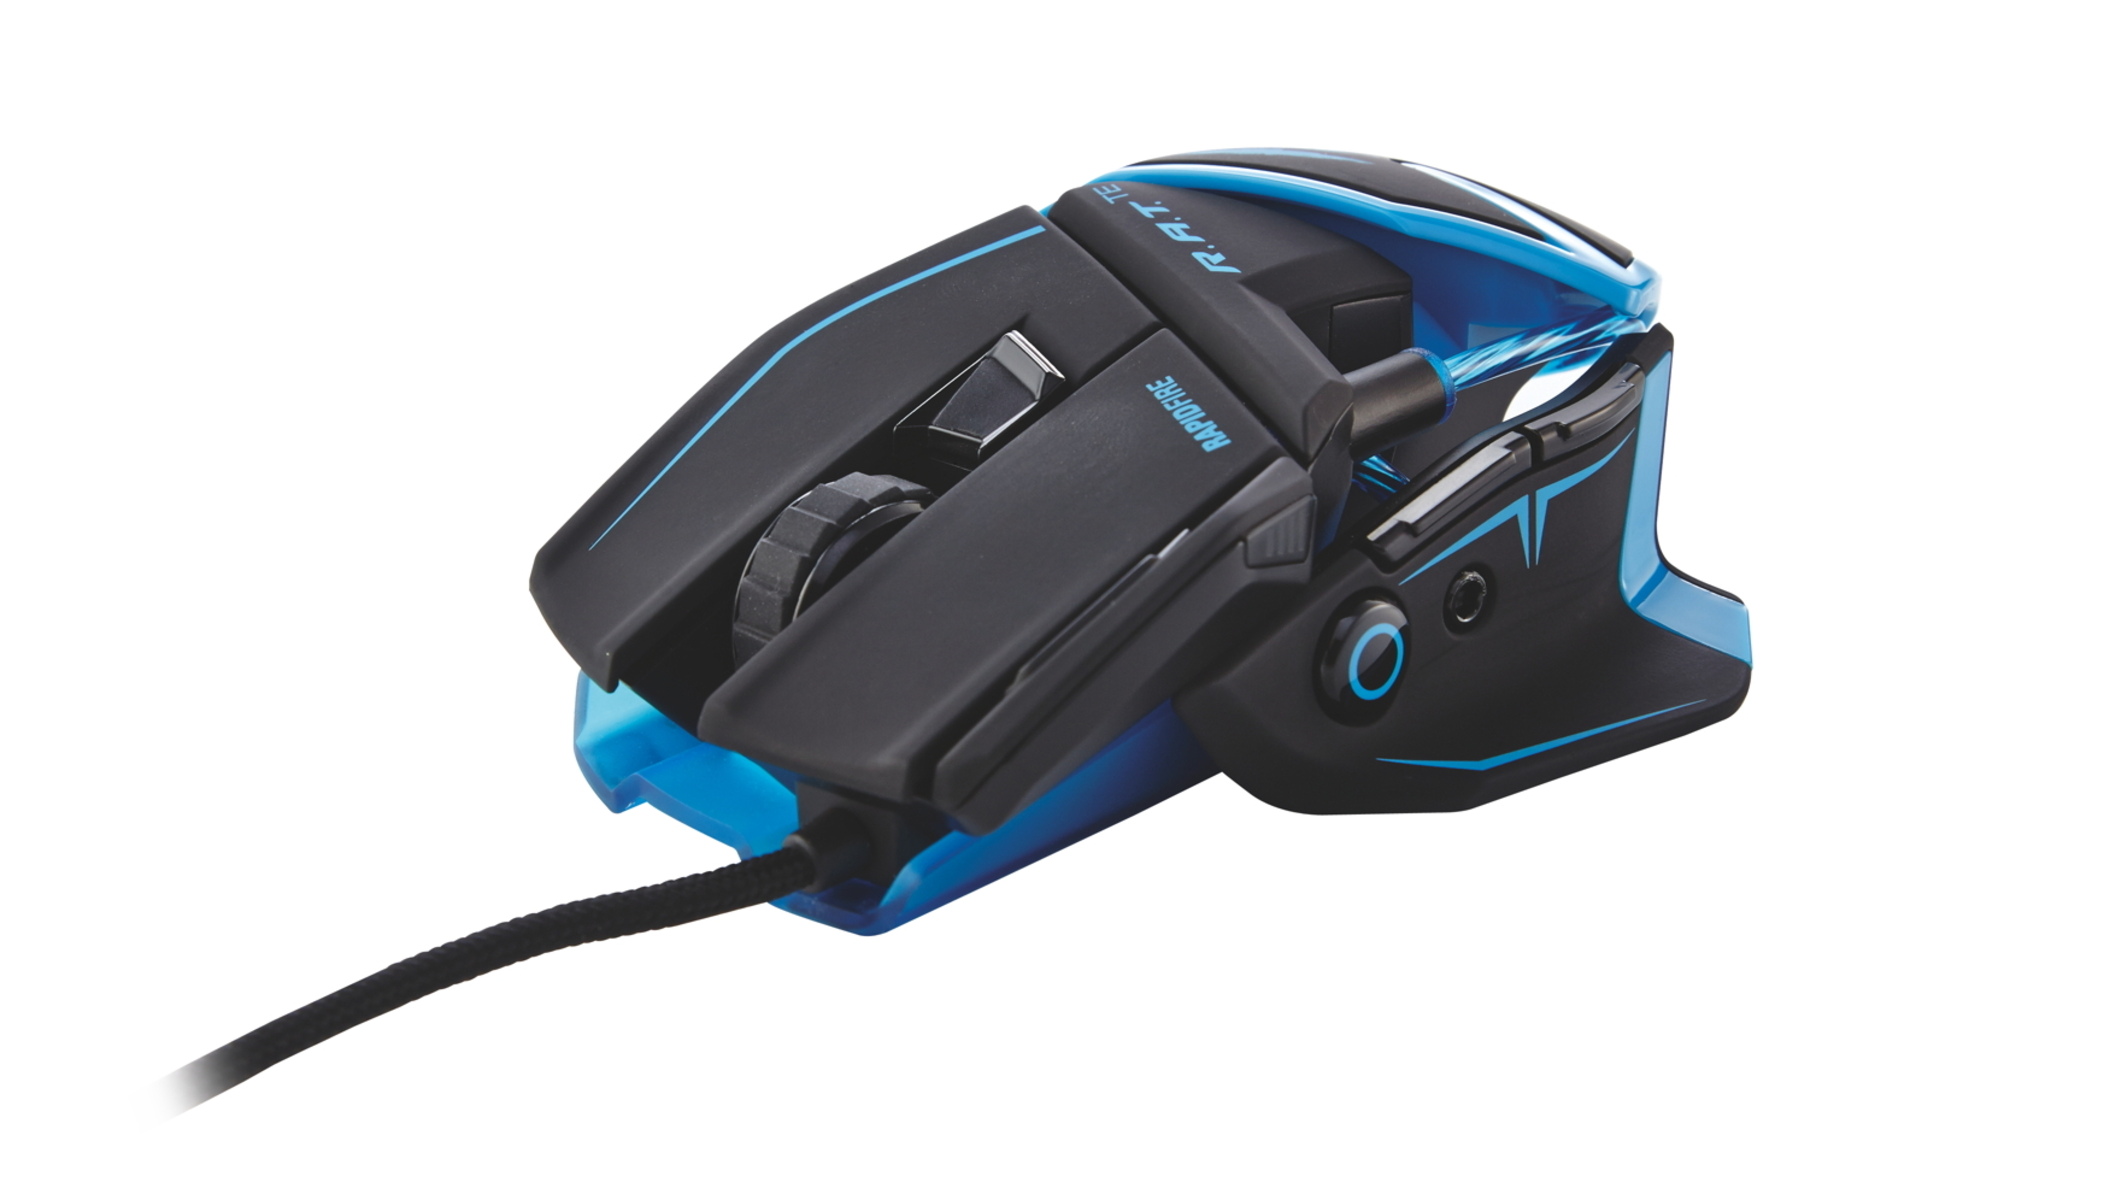 How To Use The Programmable Buttons On Rat Te Gaming Mouse